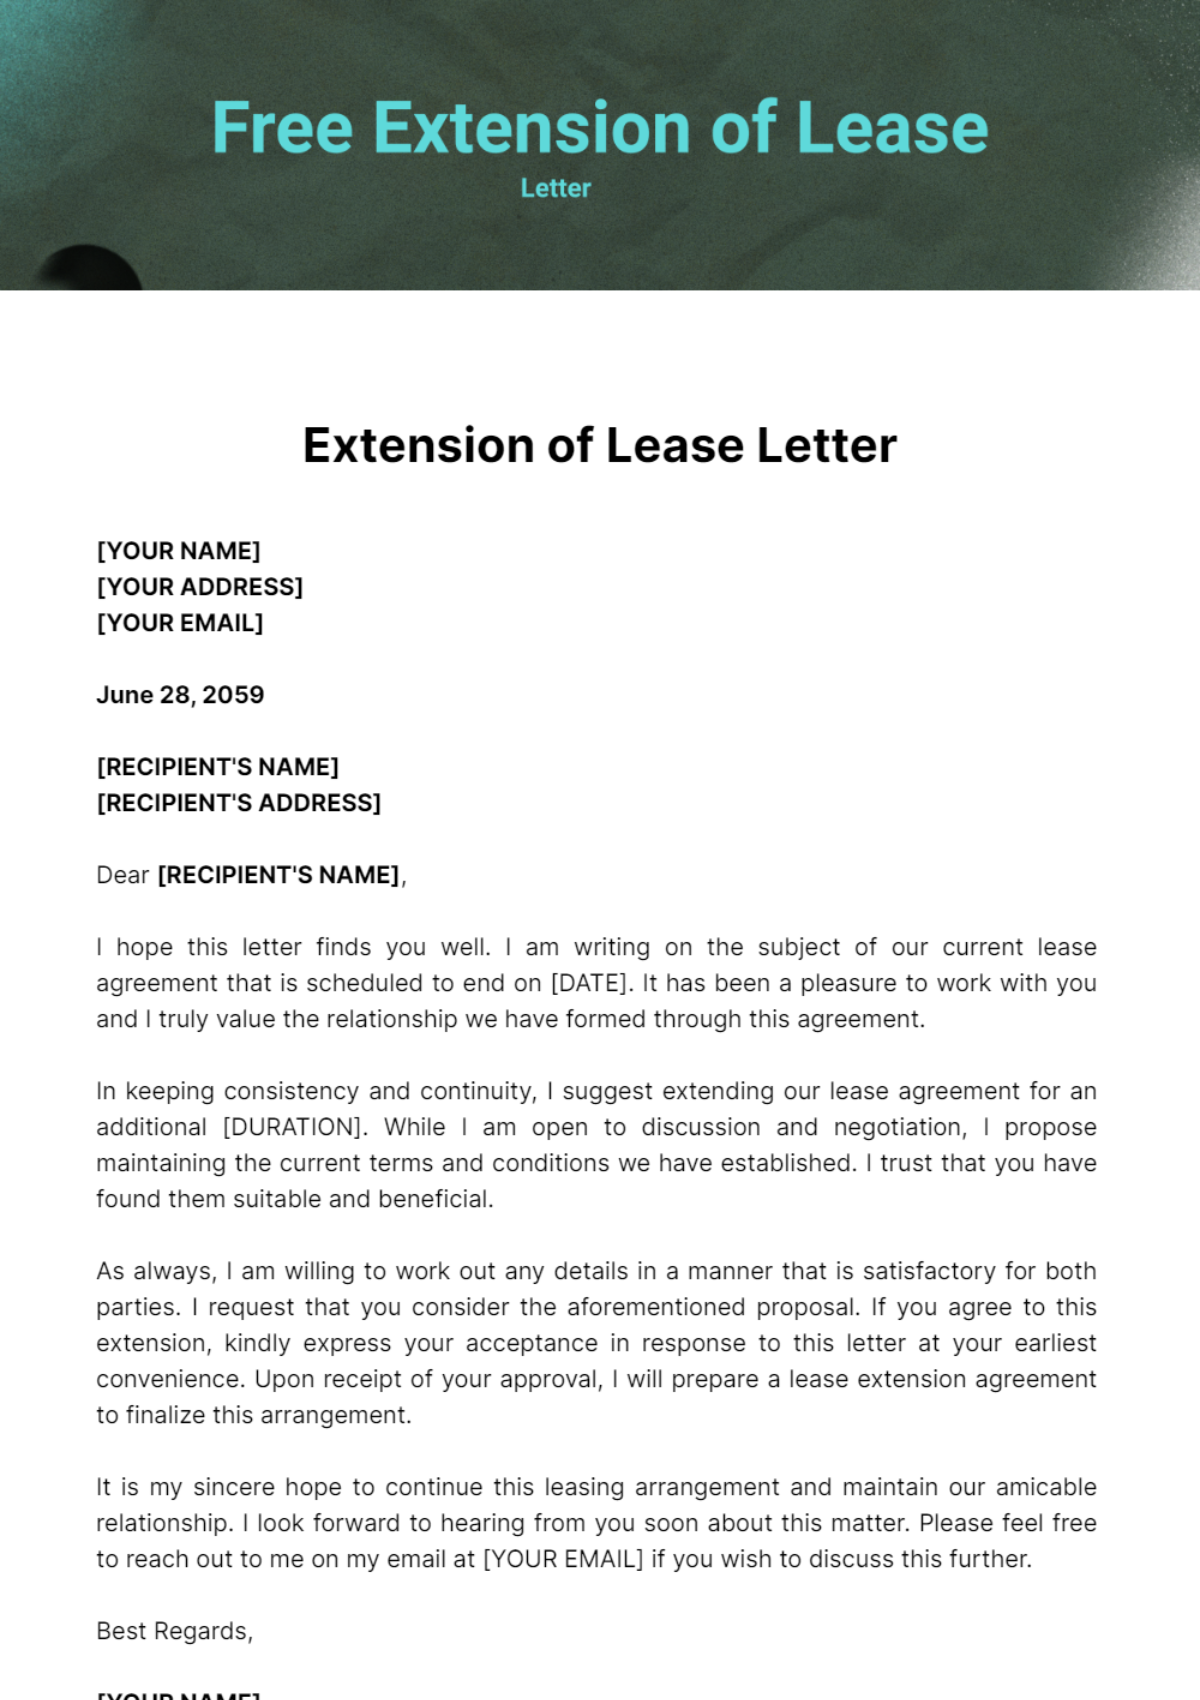 Free Extension of Lease Letter Template